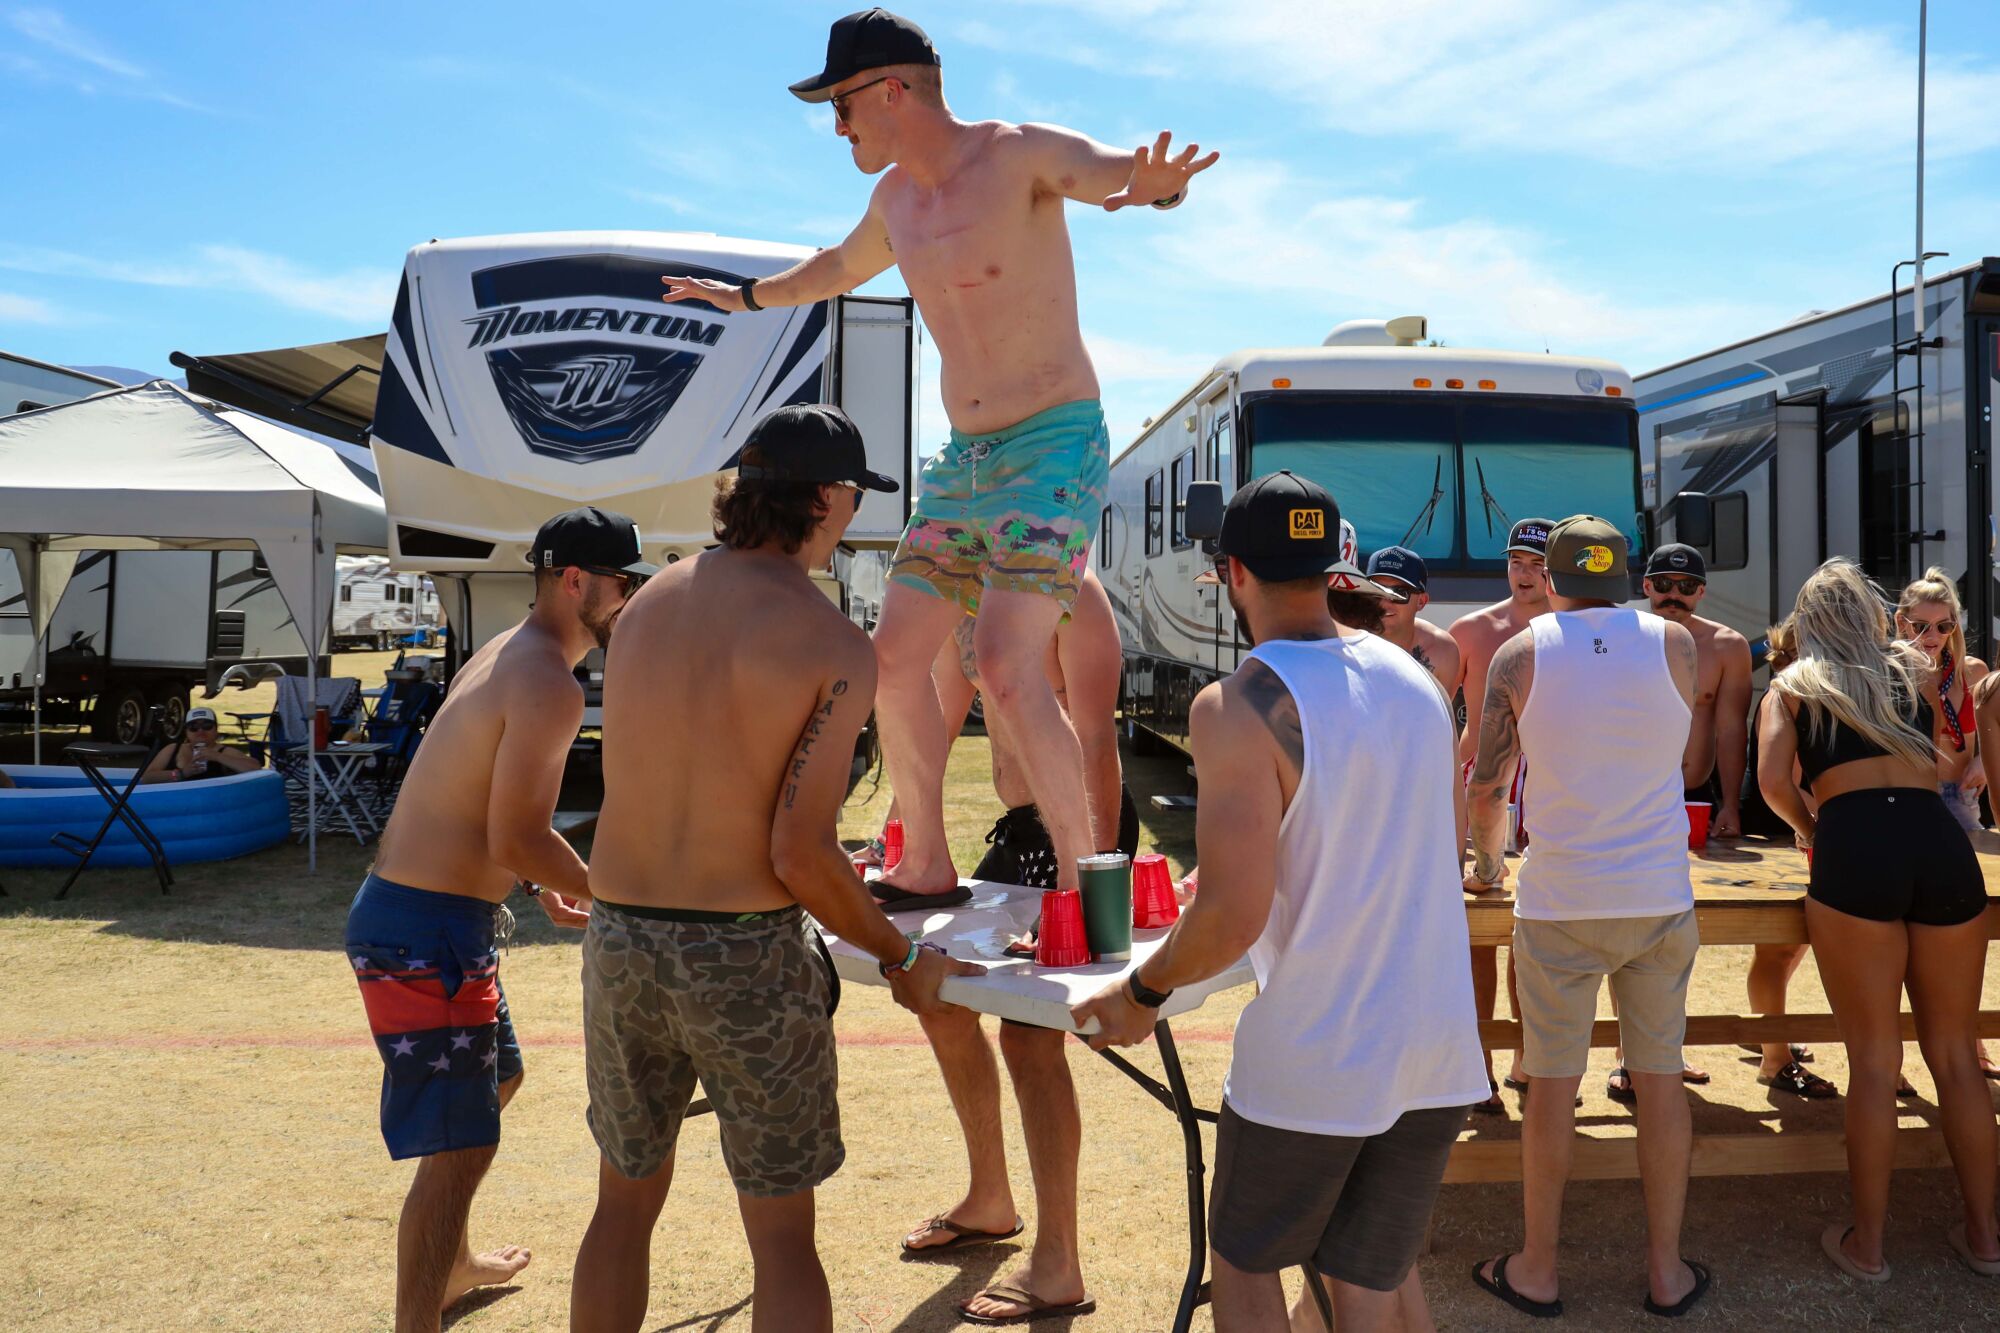 A country music fan strikes a surfer pose on a table as people play drinking games at the Stagecoach festival campgrounds.